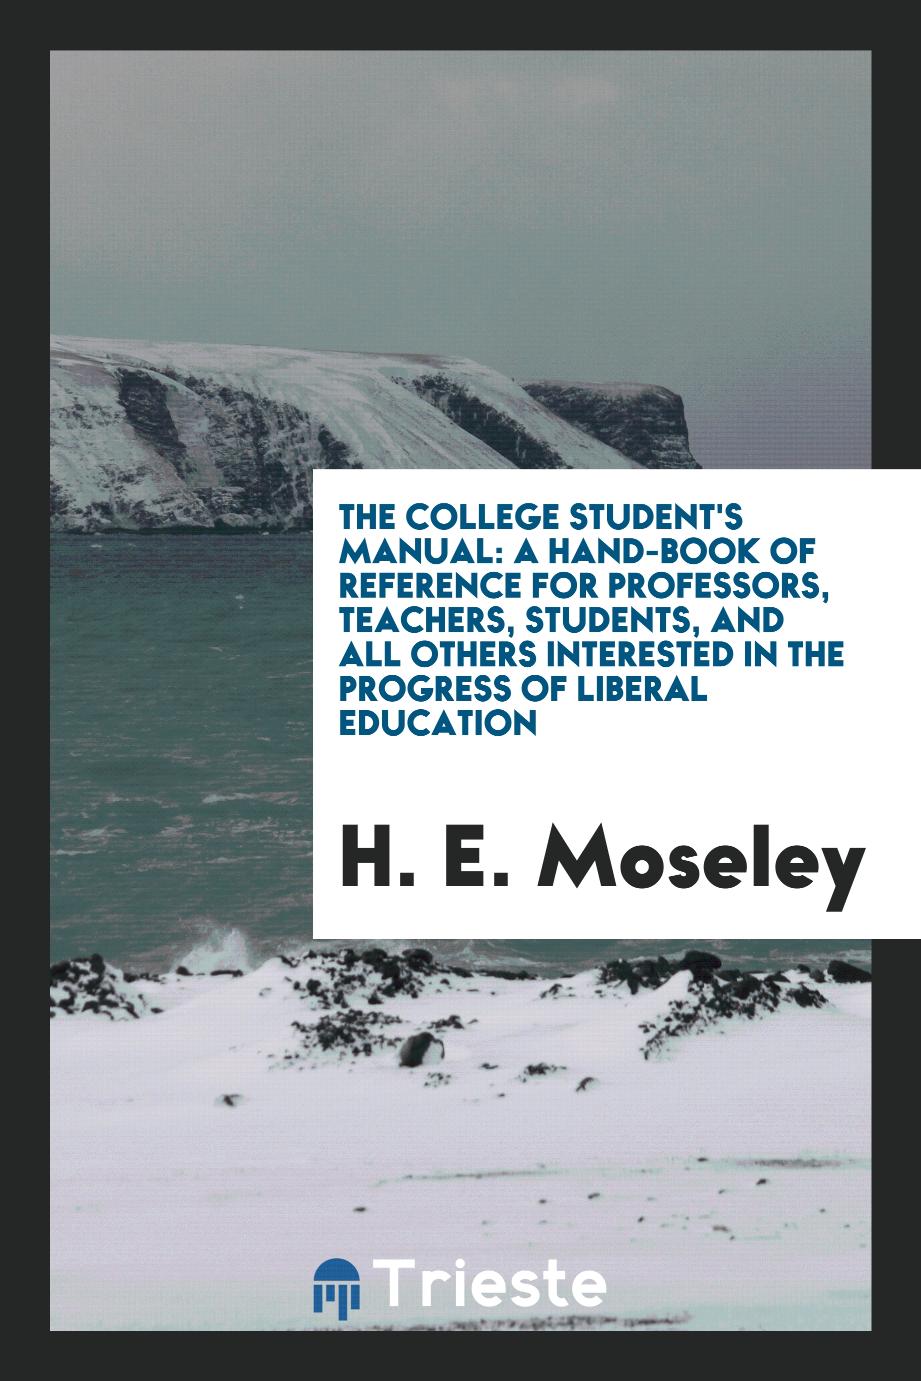 The College Student's Manual: A Hand-Book of Reference for Professors, Teachers, Students, and All Others Interested in the Progress of Liberal Education